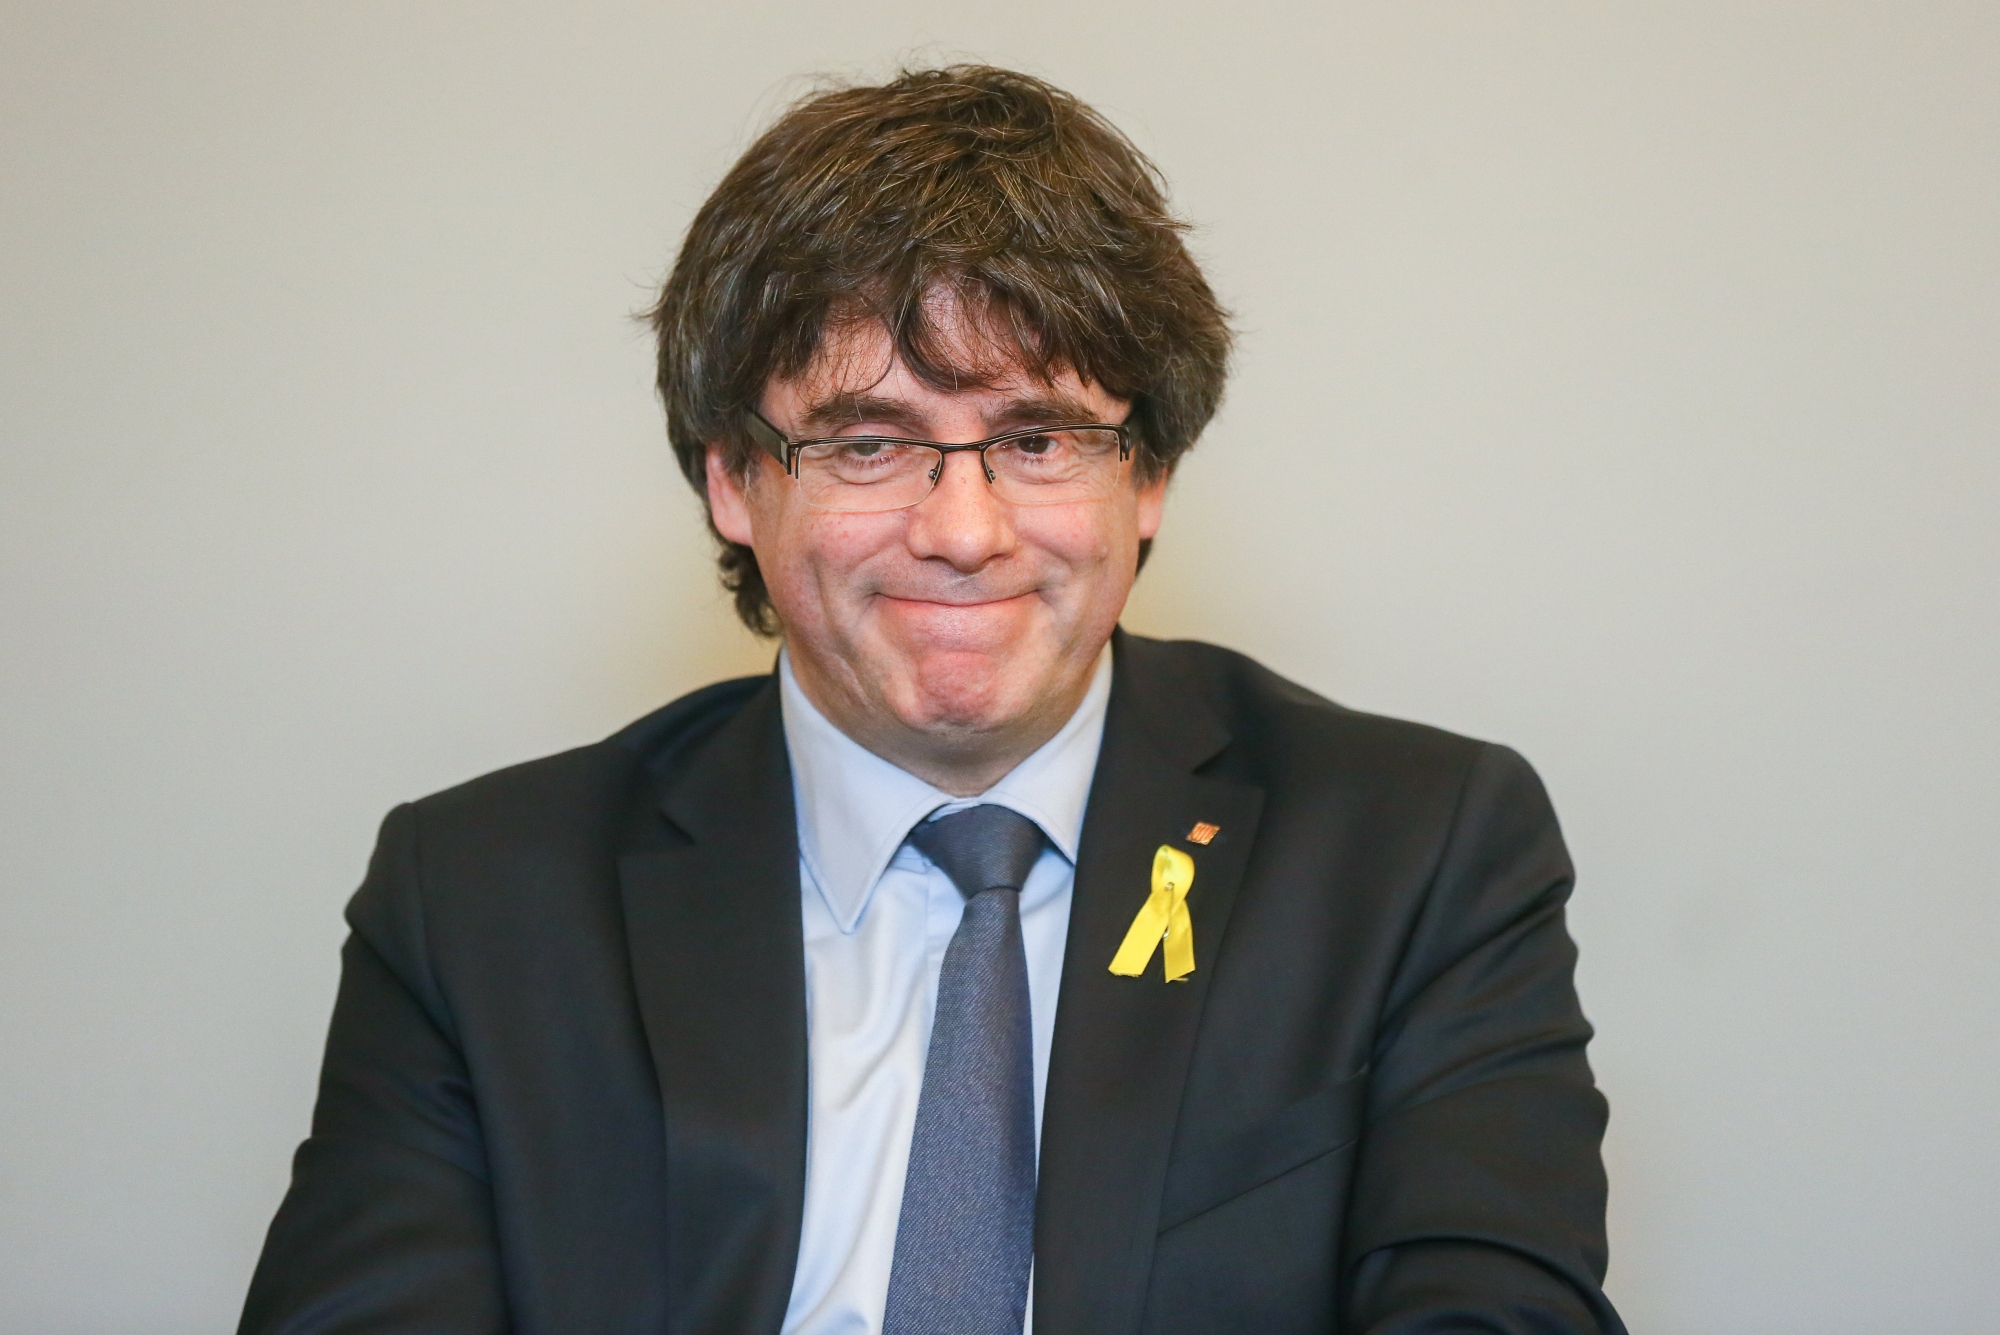 epa06602948 Former Catalan leader Carles Puigdemont meets his party for a working session at Marivaux Hotel in Brussels, Belgium, 14 March 2018. According to media reports on 01 March, Carles Puigdemont resigned from a bid to be reappointed for the post of Catalonia's President in favour of Jordi Sanchez, who is currently in jail on sedition charges related to the Catalonian independence referendum that was deemed illegal by Spain in October 2017.  EPA/STEPHANIE LECOCQ BELGIUM CATALONIA CARLES PUIGDEMONT